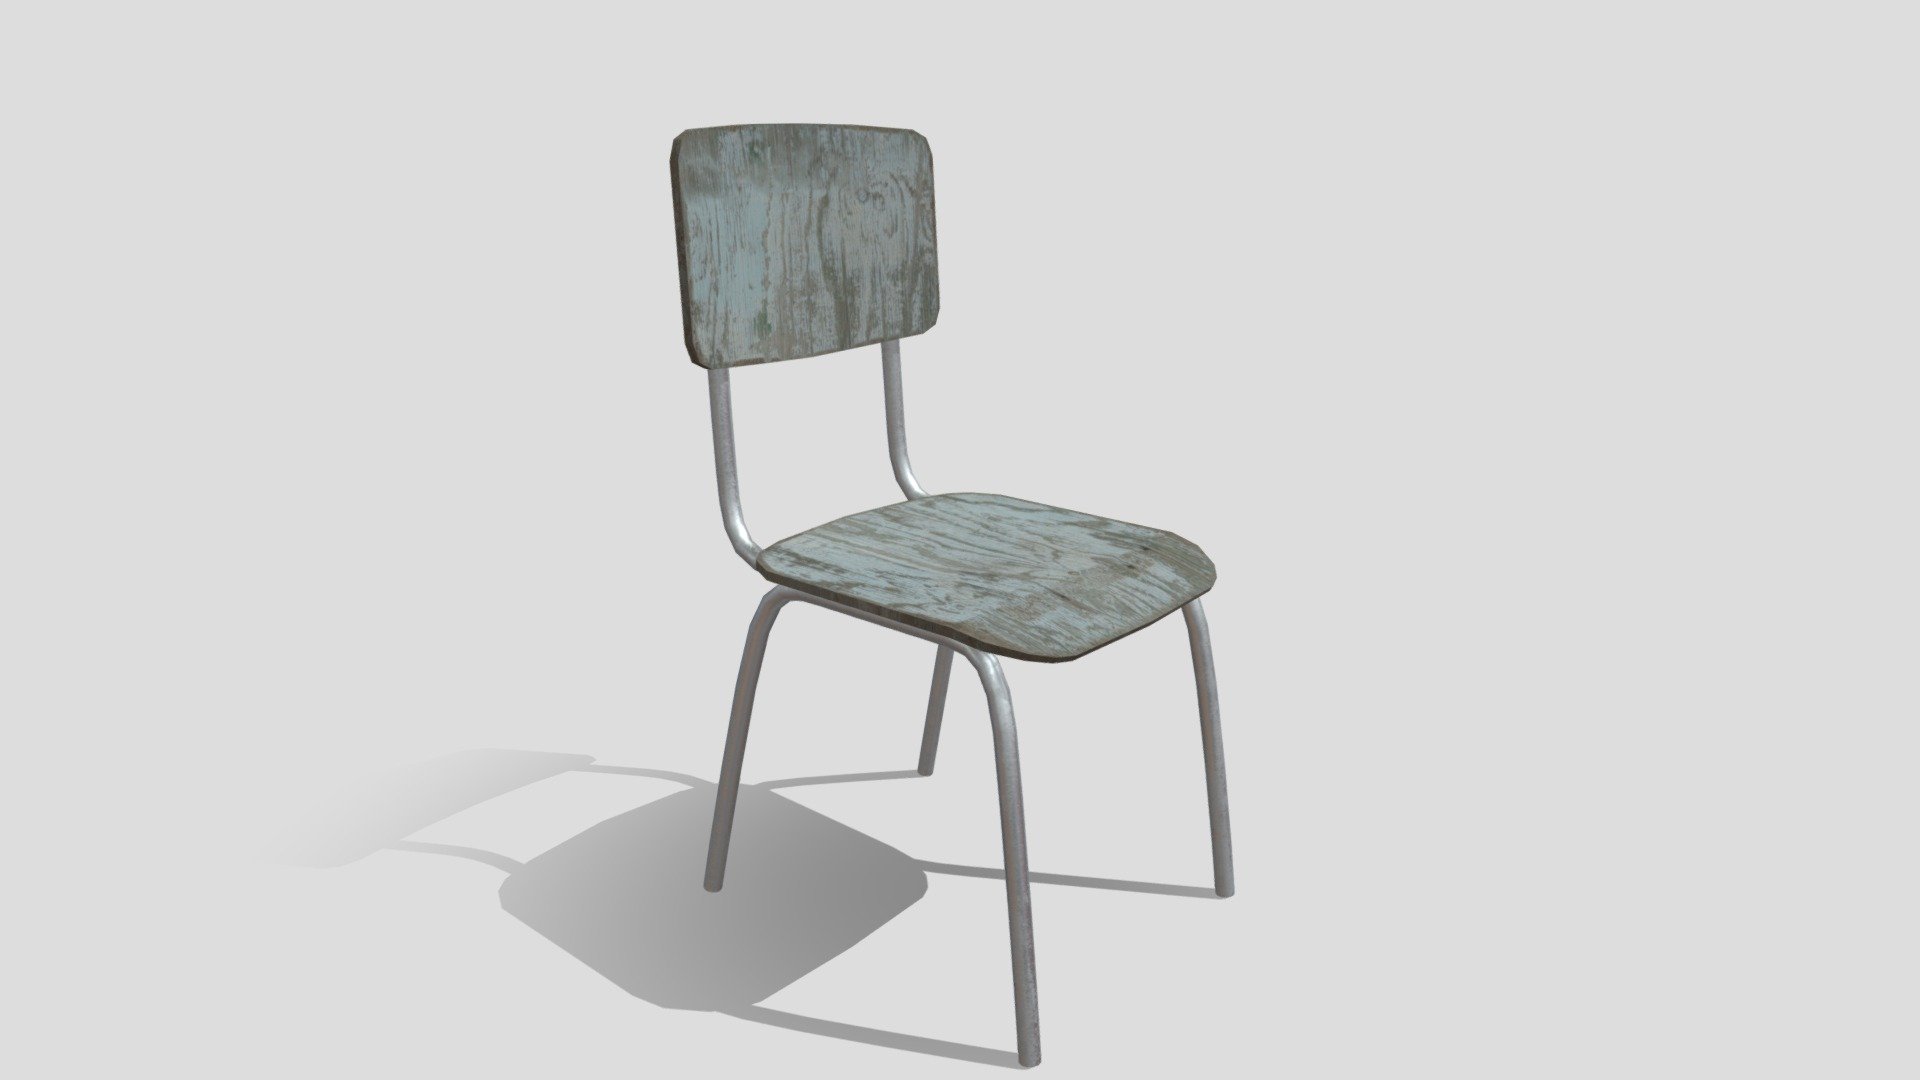 An old School Chair for an abandoned school setting or a horror scene.

Chair Model + Texture

Check out our bundles, we have more fitting models for each setting 3d model